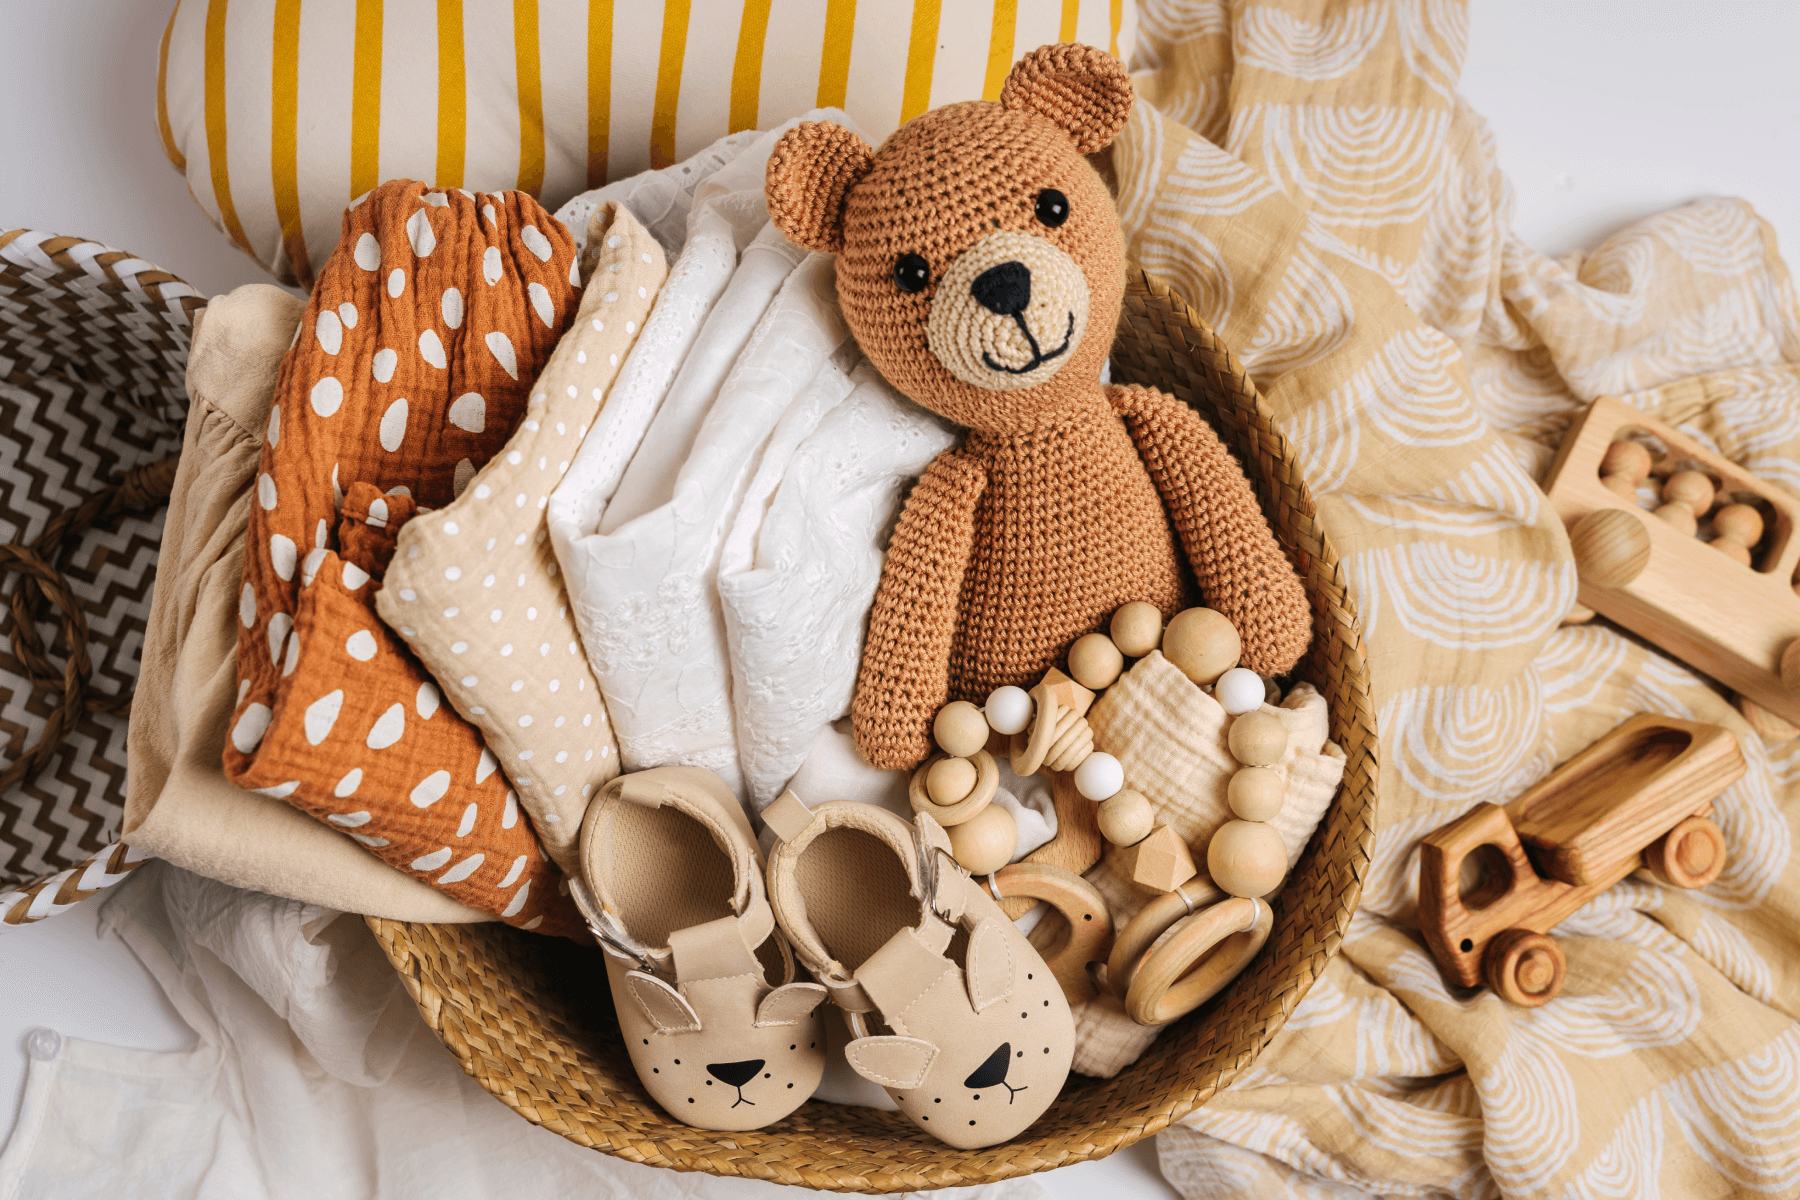 The 9 Best Baby Registry Services for Expectant Parents